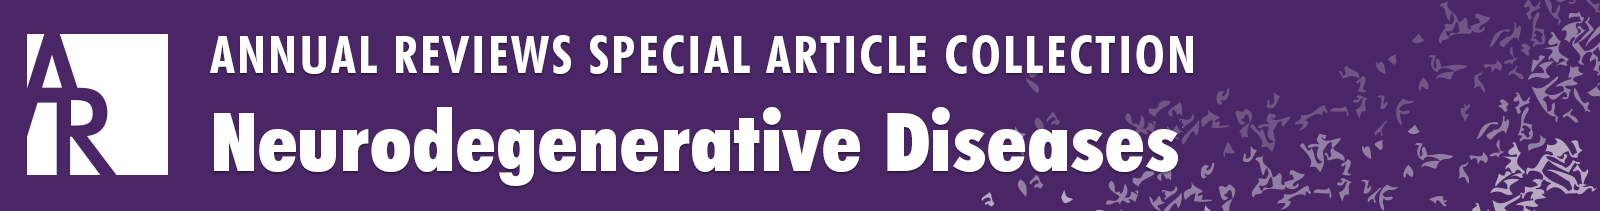 Neurodegenerative Diseases Special Article Collection